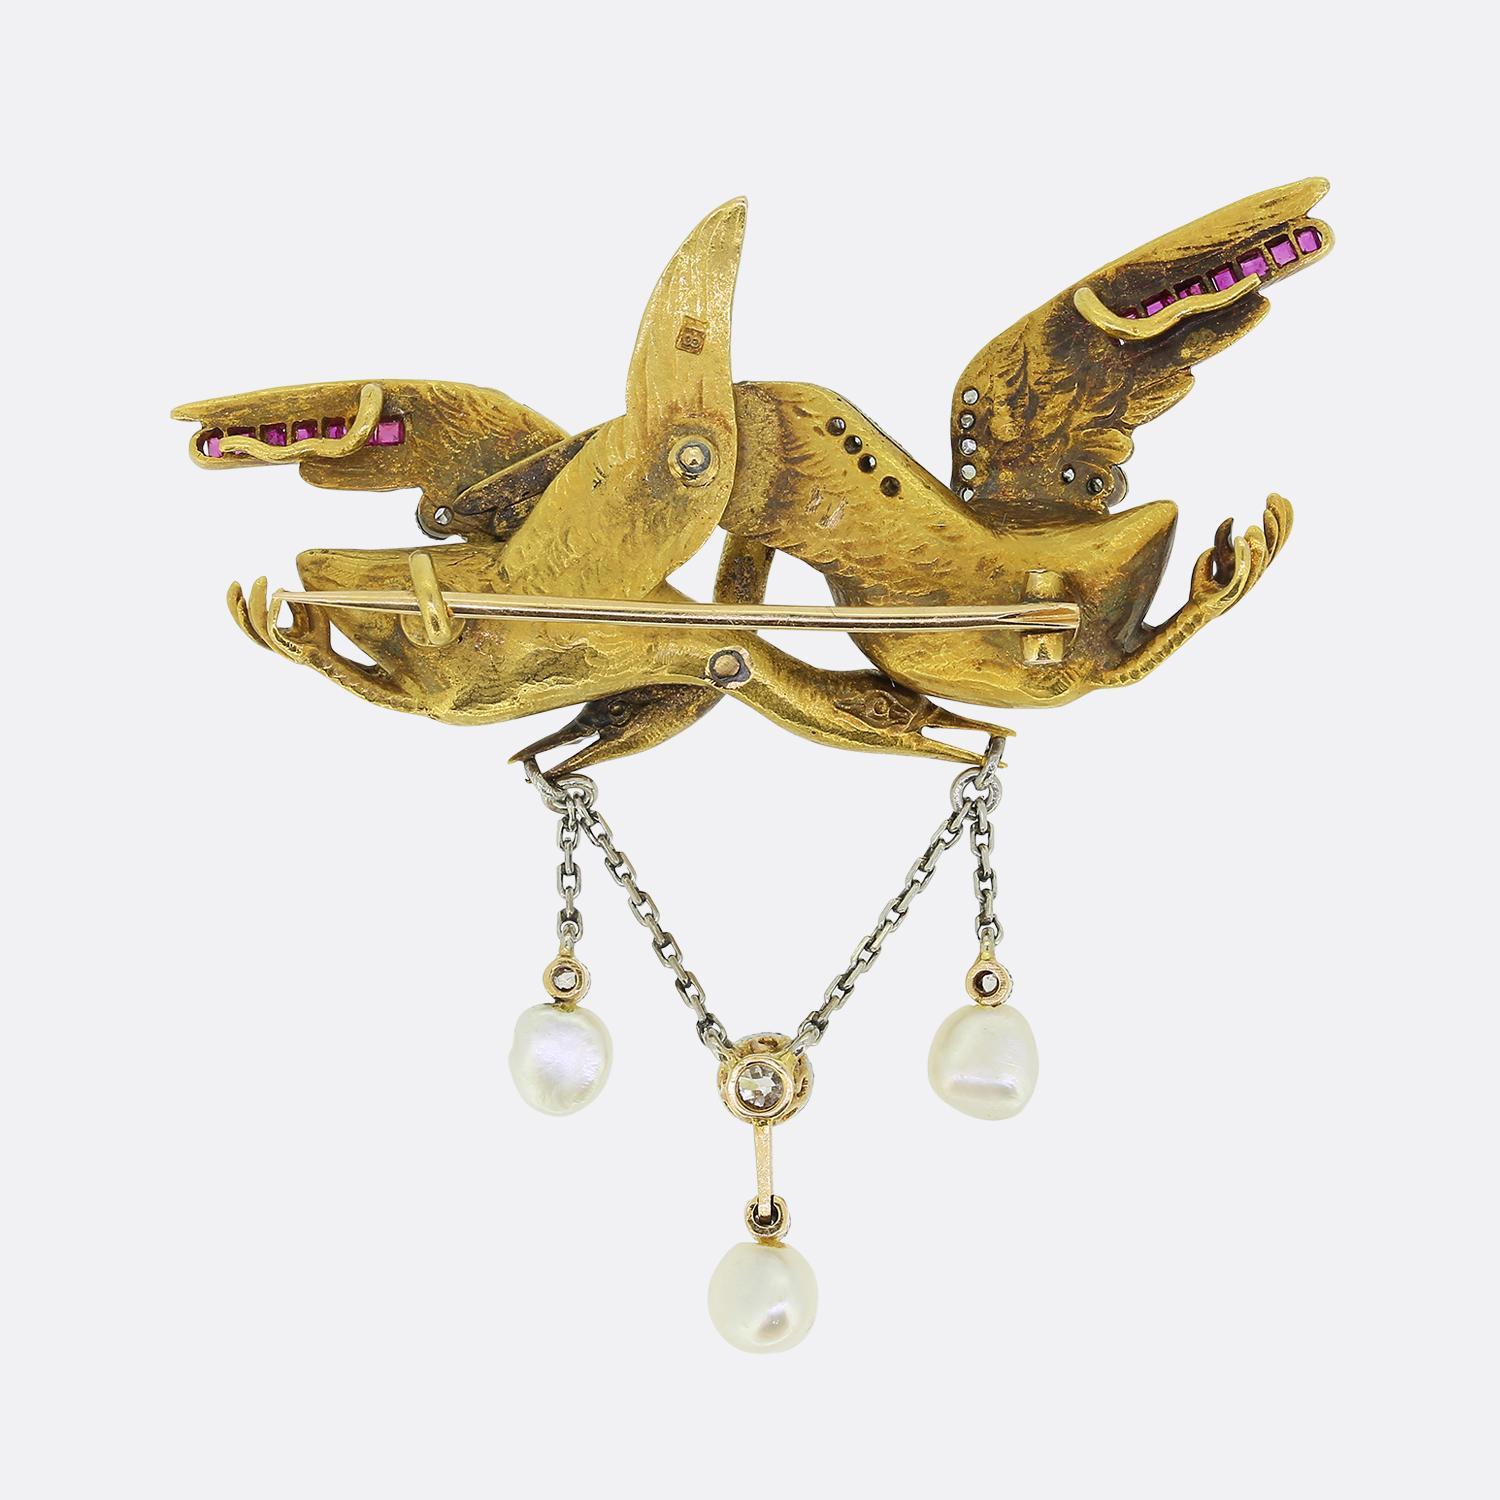 Here we have a wonderfully detailed brooch dating back to the Victorian era. This antique piece has been crafted from a rich 18ct yellow gold into the shape of two crossover stork birds. The features of these famous folklore birds have been